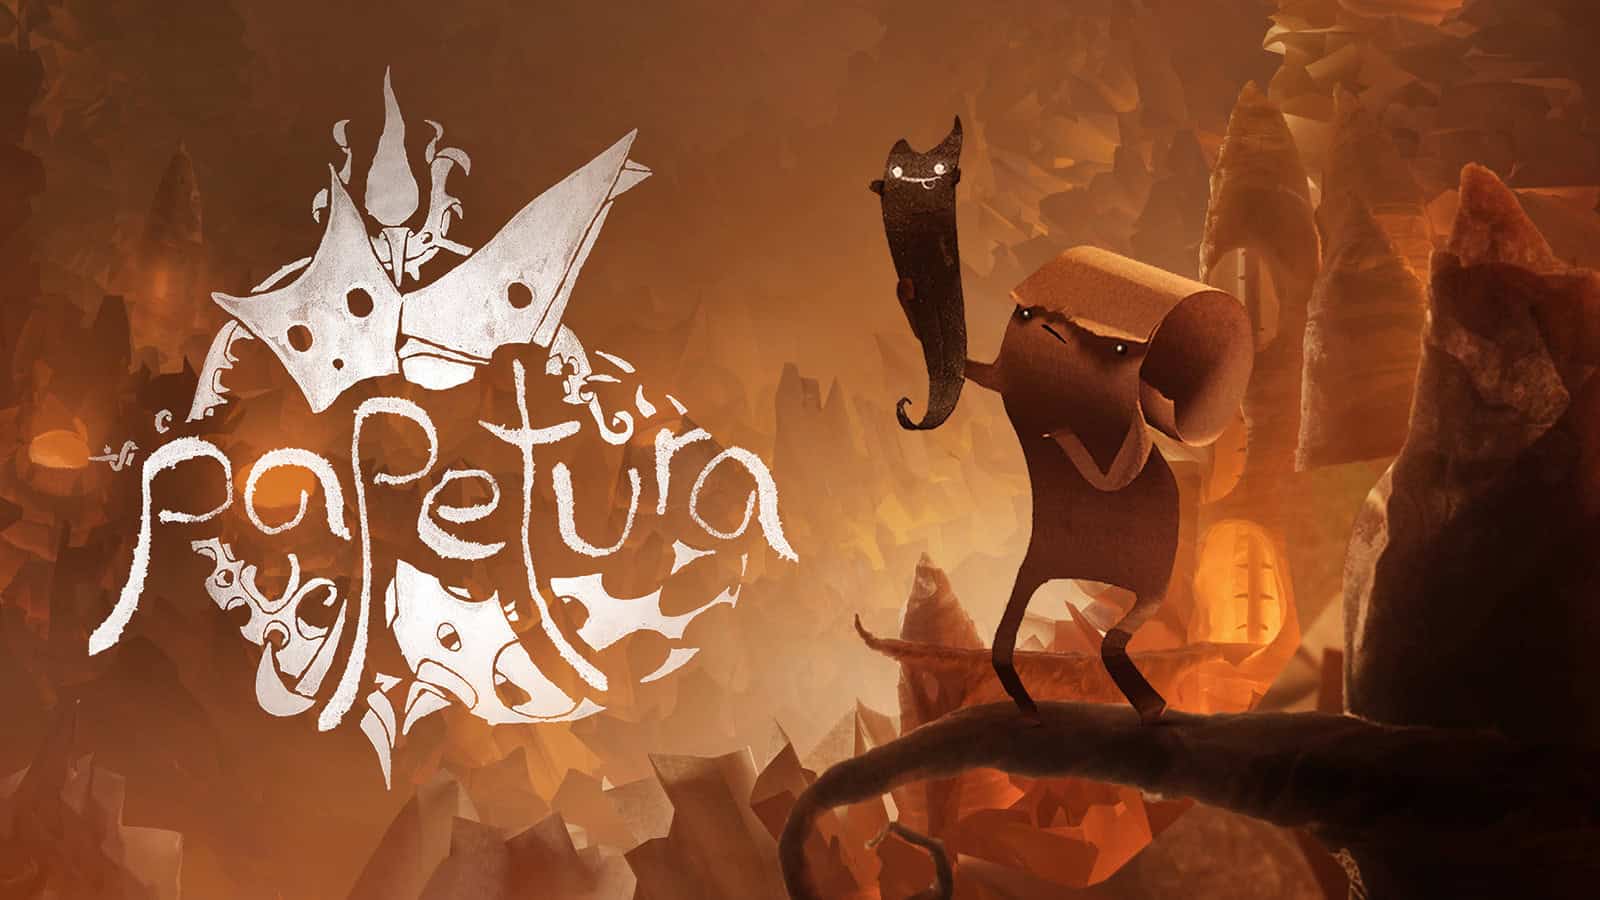 The official artwork for Papetura, showing the game's two main characters in their paper world.